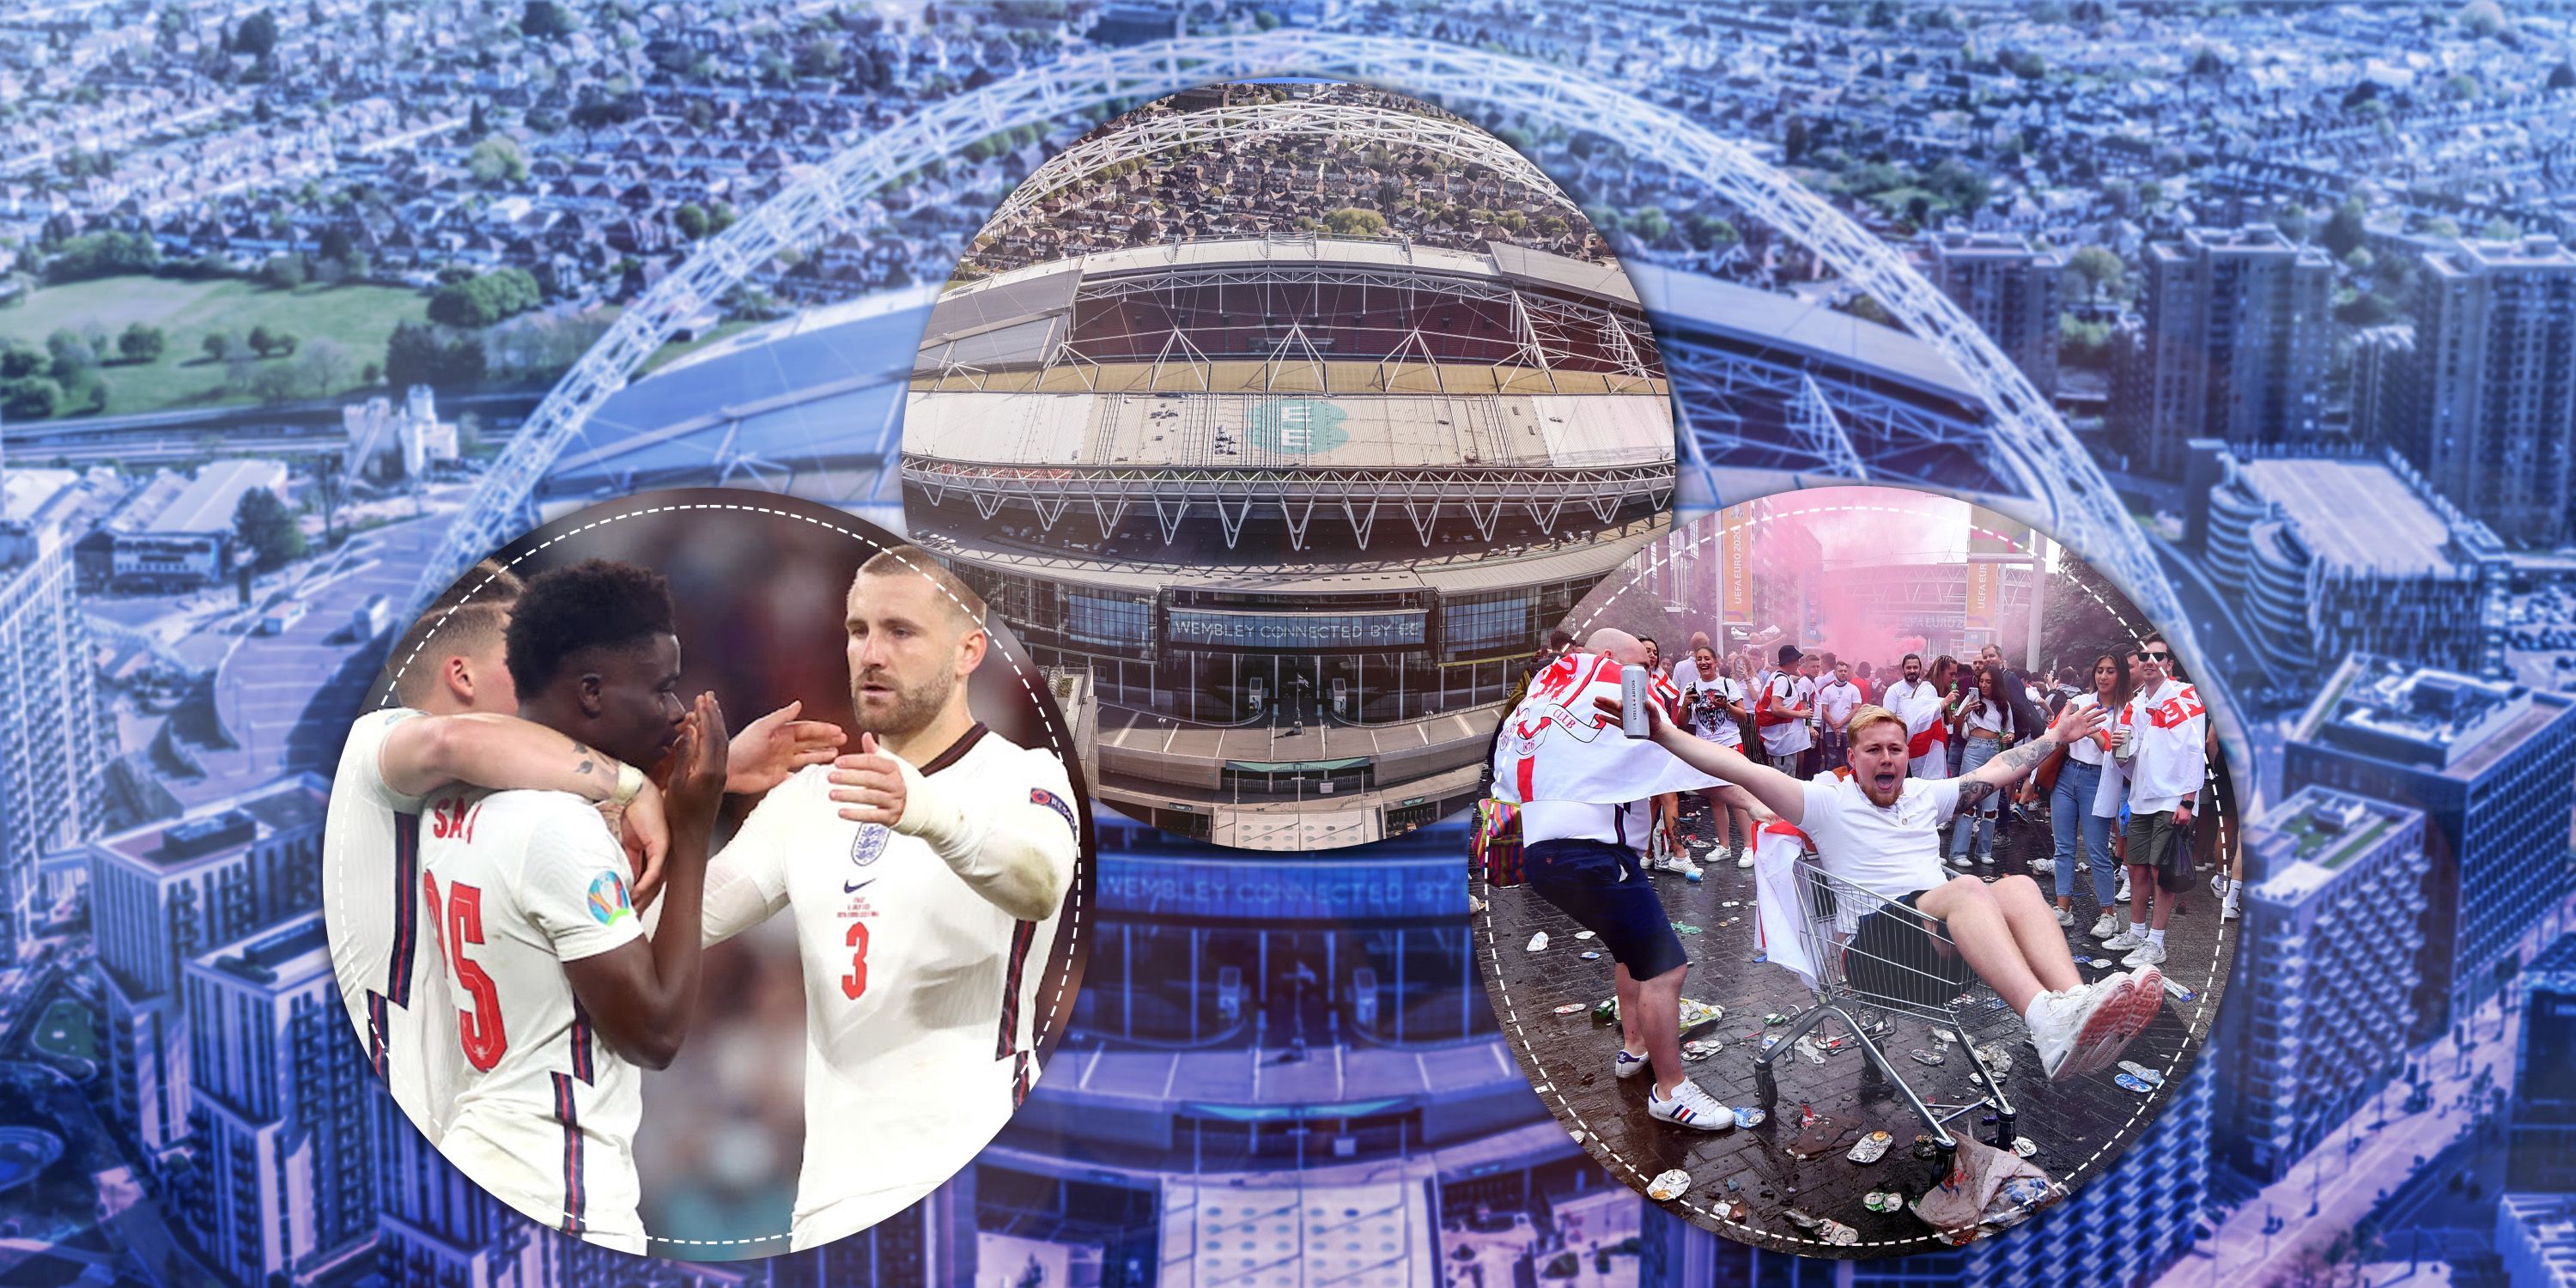 England players looking dejected with Wembley Stadium and England fans causing trouble.